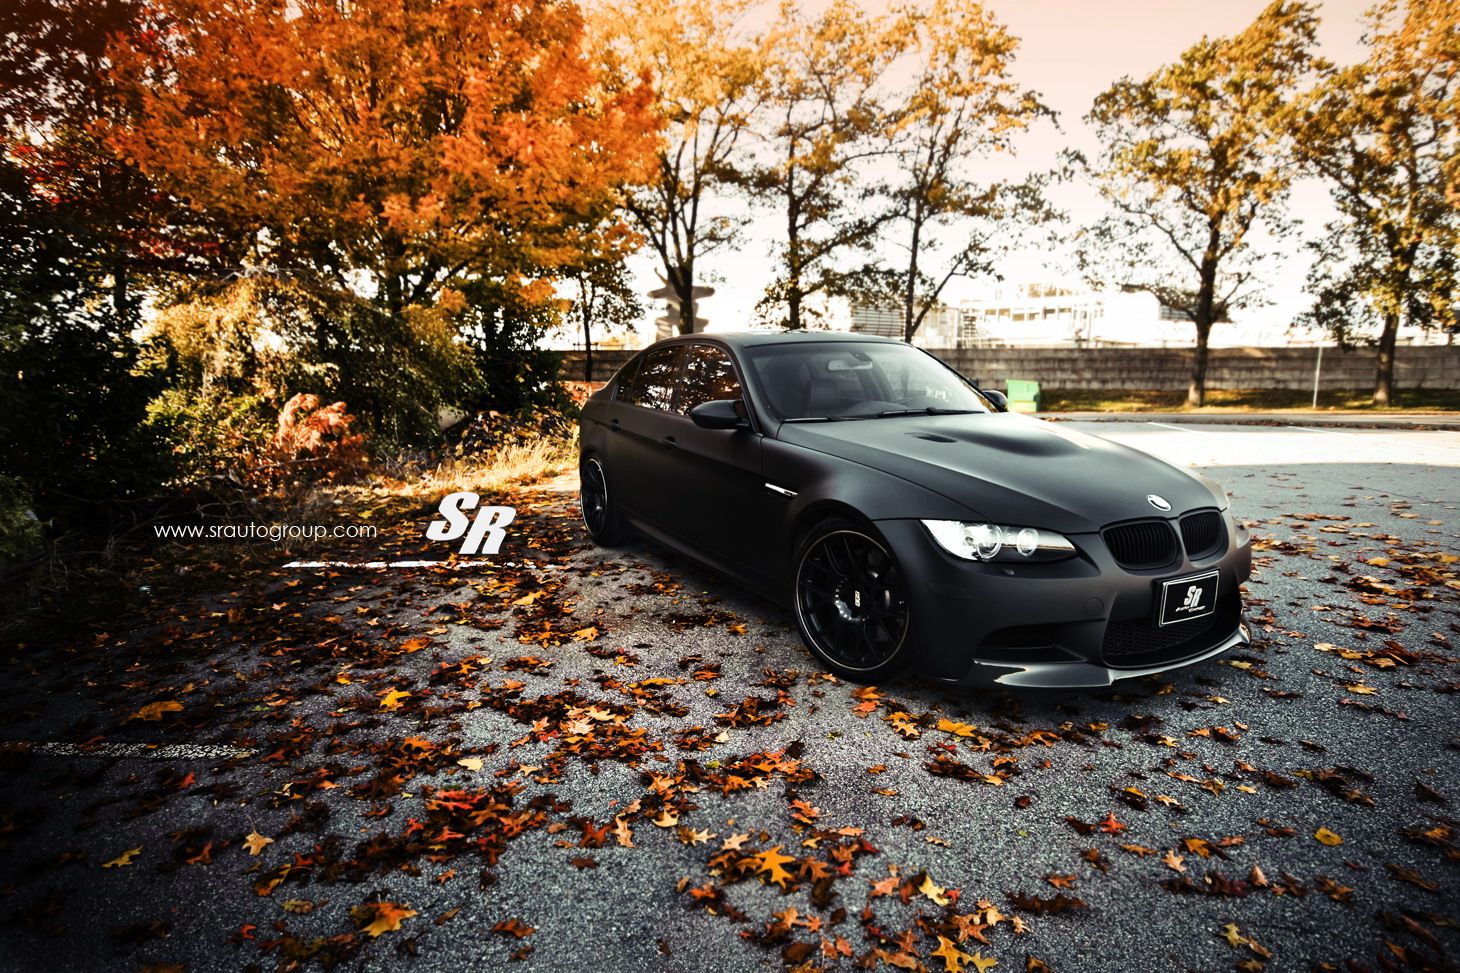 2008 - 2010 BMW M3 by SR Auto Group